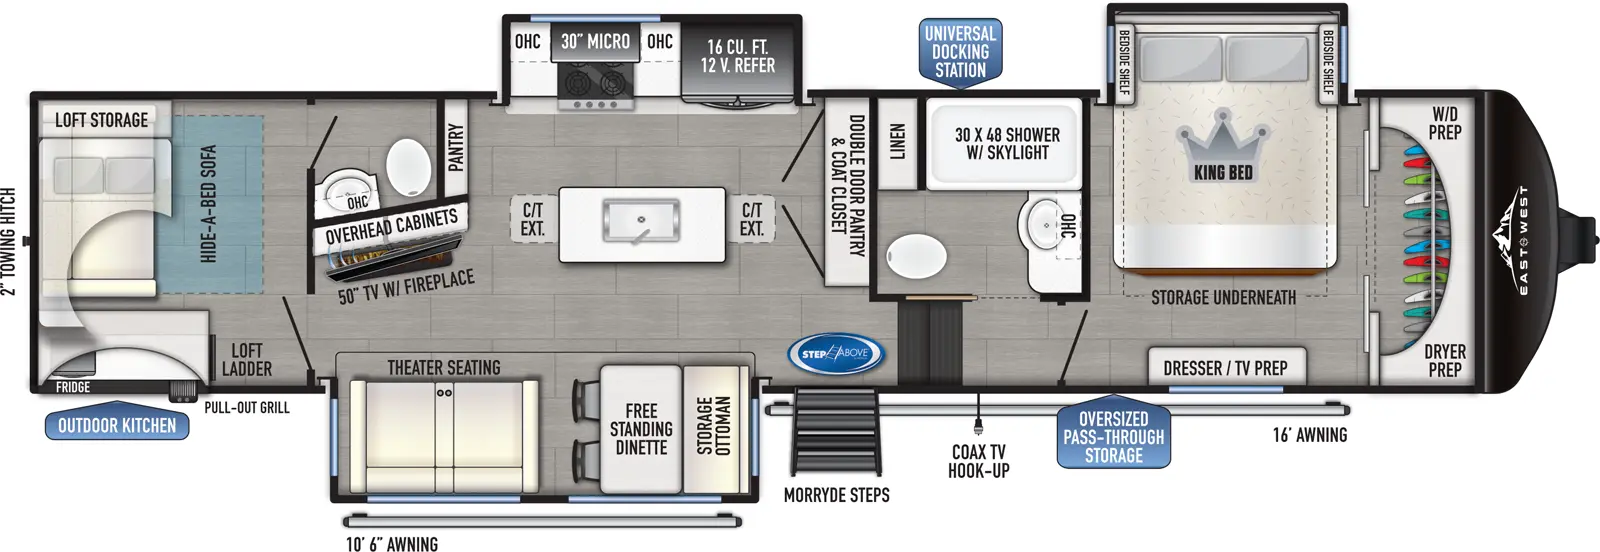 The 3700BH-OK has 3 slideouts and one entry. Exterior features an oversized pass through storage, universal docking station, MORryde steps, coax TV hookup, 10 foot 6 inch awning and 16 foot awning, outdoor kitchen with pull-out grill and refrigerator, and 2 inch towing hitch. Interior layout front to back: front closet with washer/dryer prep, off-door side king bed slideout with storage underneath, and door side dresser with TV prep; off-door side full bathroom with overhead cabinet, linen closet, and shower with skylight; steps down to main living area and entry; double door pantry and coat closet along inner wall; off-door side slideout with 12V refrigerator, overhead cabinet, microwave, and cooktop, and pantry along inner wall; kitchen island with sink and extensions; door side slideout with free-standing dinette with storage ottoman, and theater seating; angled inner wall with overhead cabinets and TV with fireplace; rear bunk room with half bathroom and loft bed and storage above rear hide-a-bed sofa.